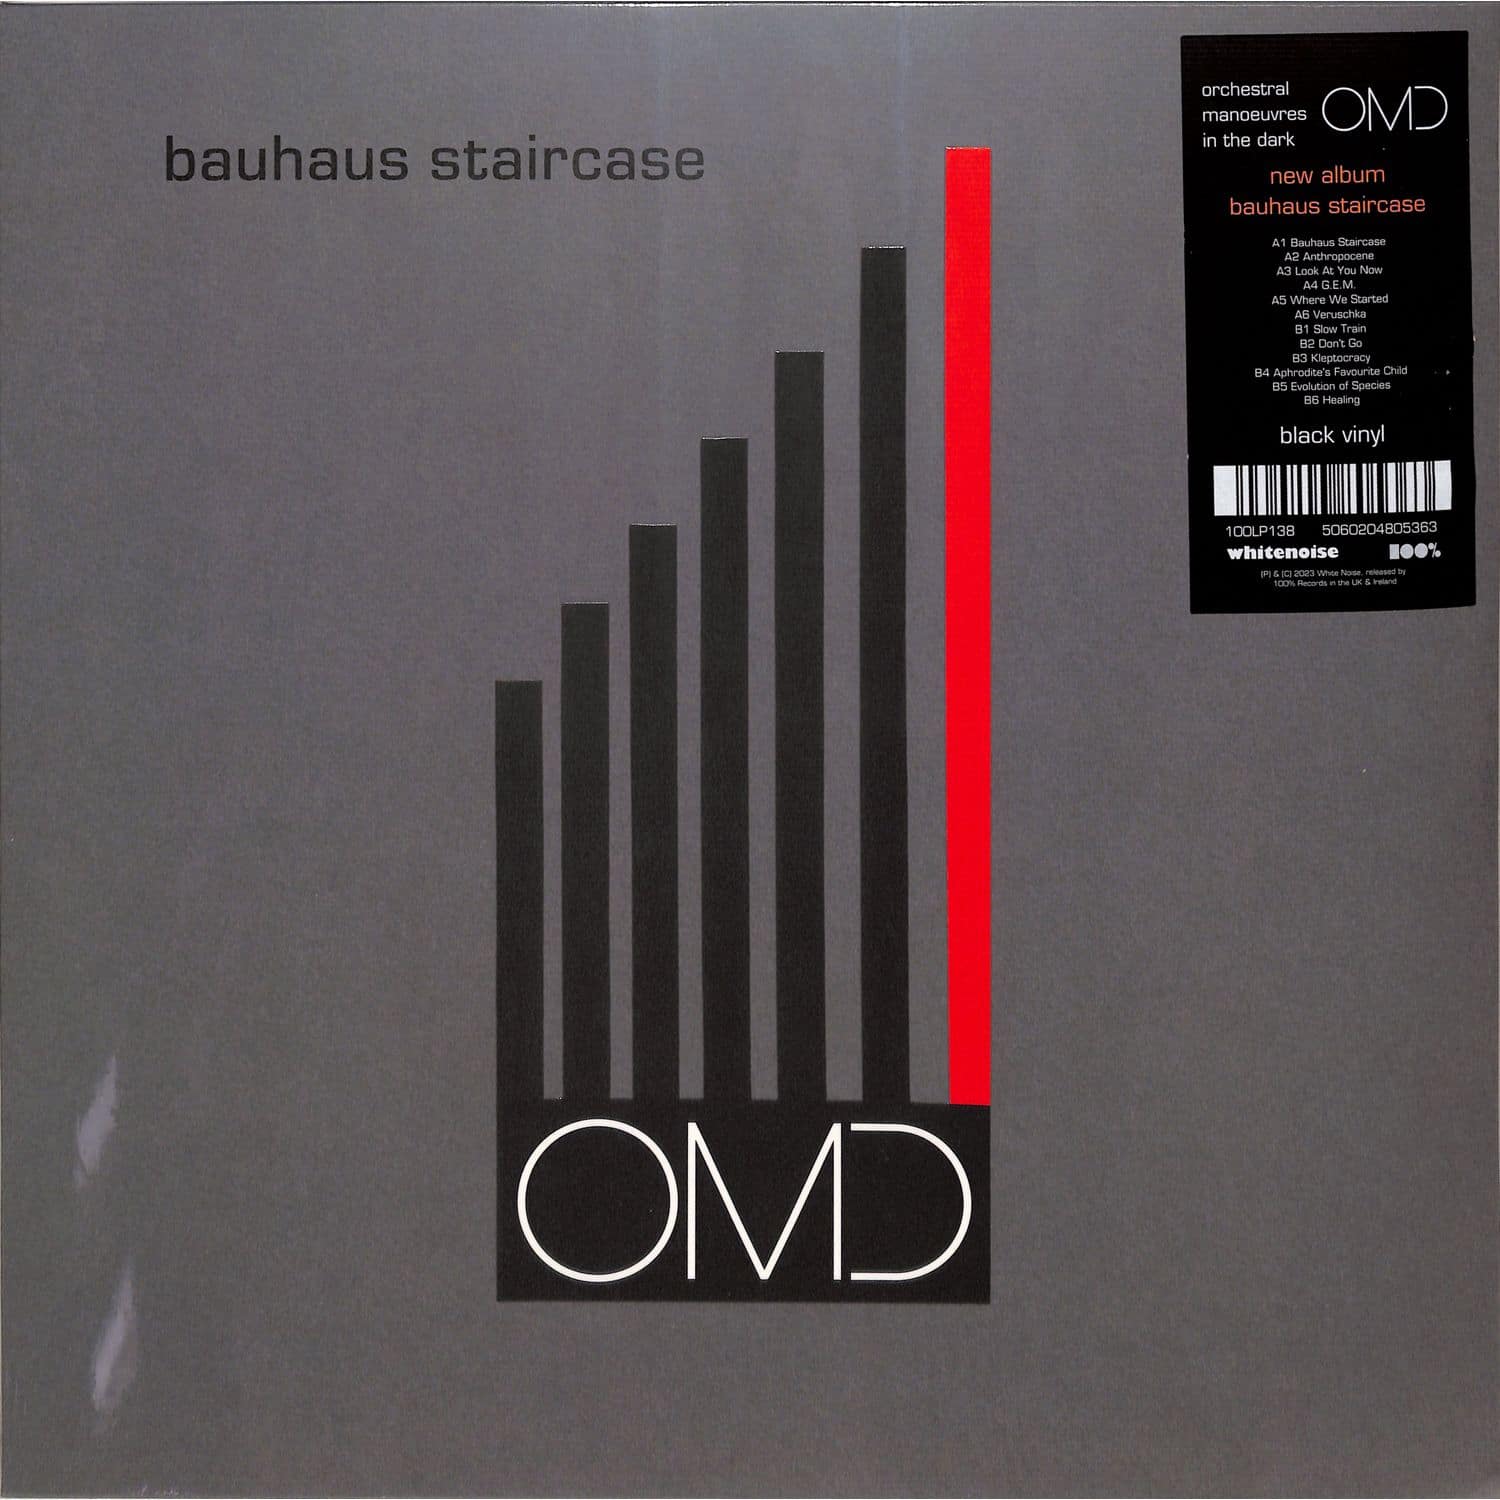 Orchestral Manoeuvres in the Dark - BAUHAUS STAIRCASE 